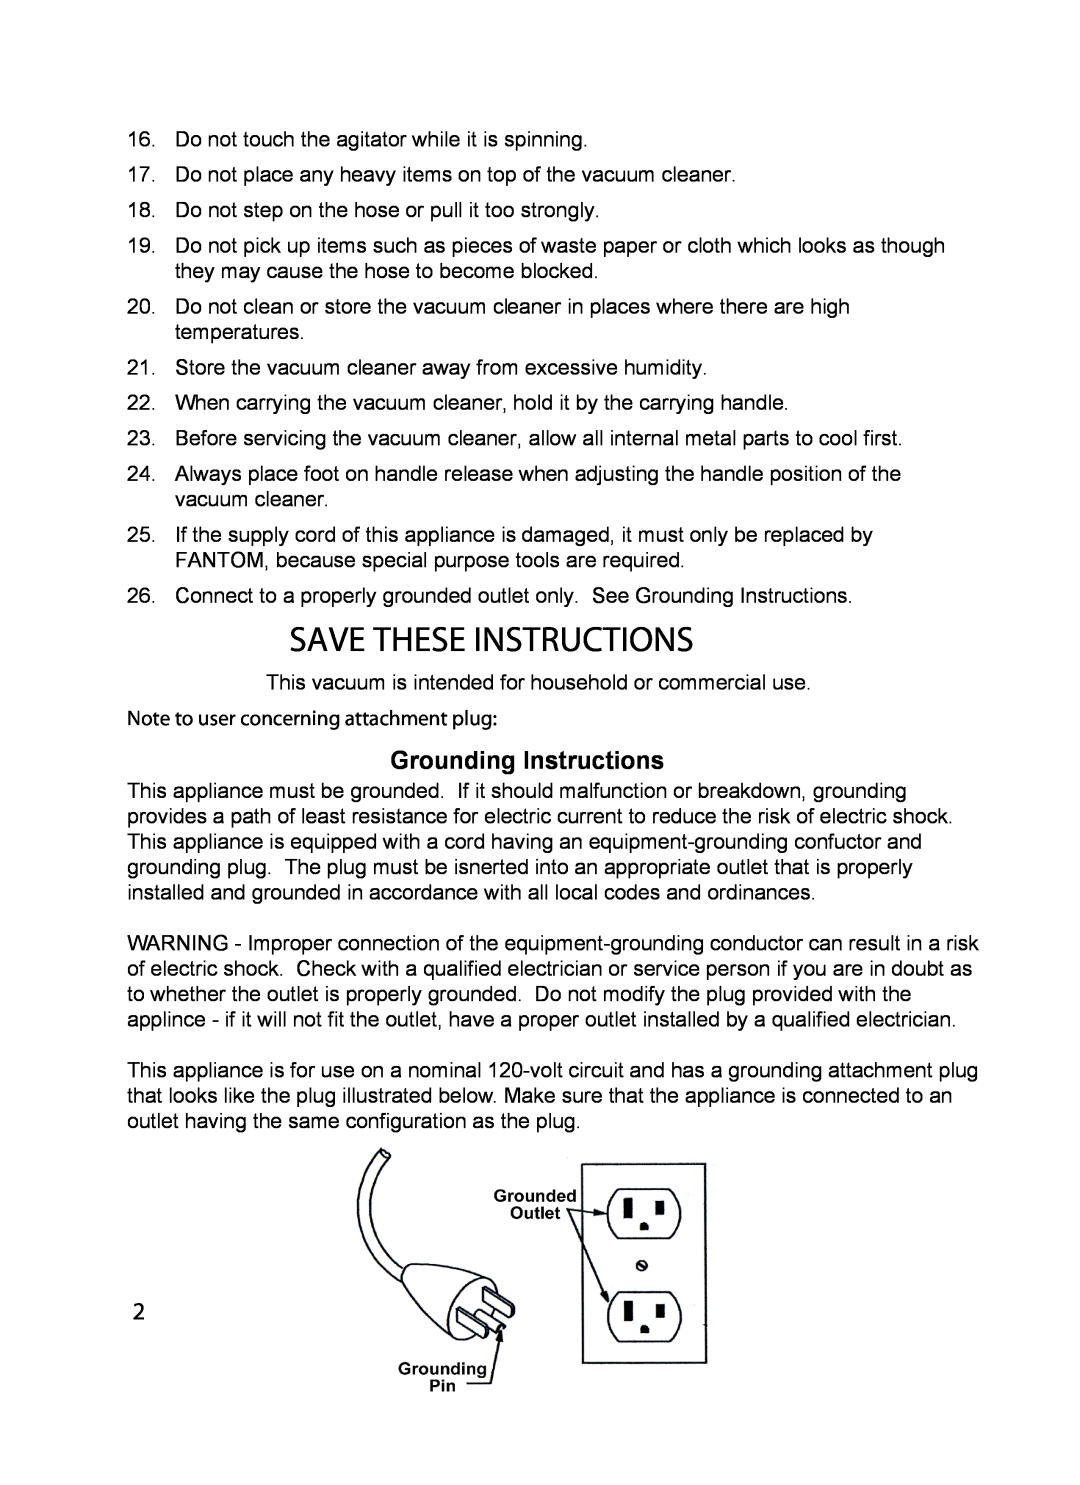 Fantom Vacuum FM742H Save These Instructions, Grounding Instructions, Note to user concerning attachment plug 